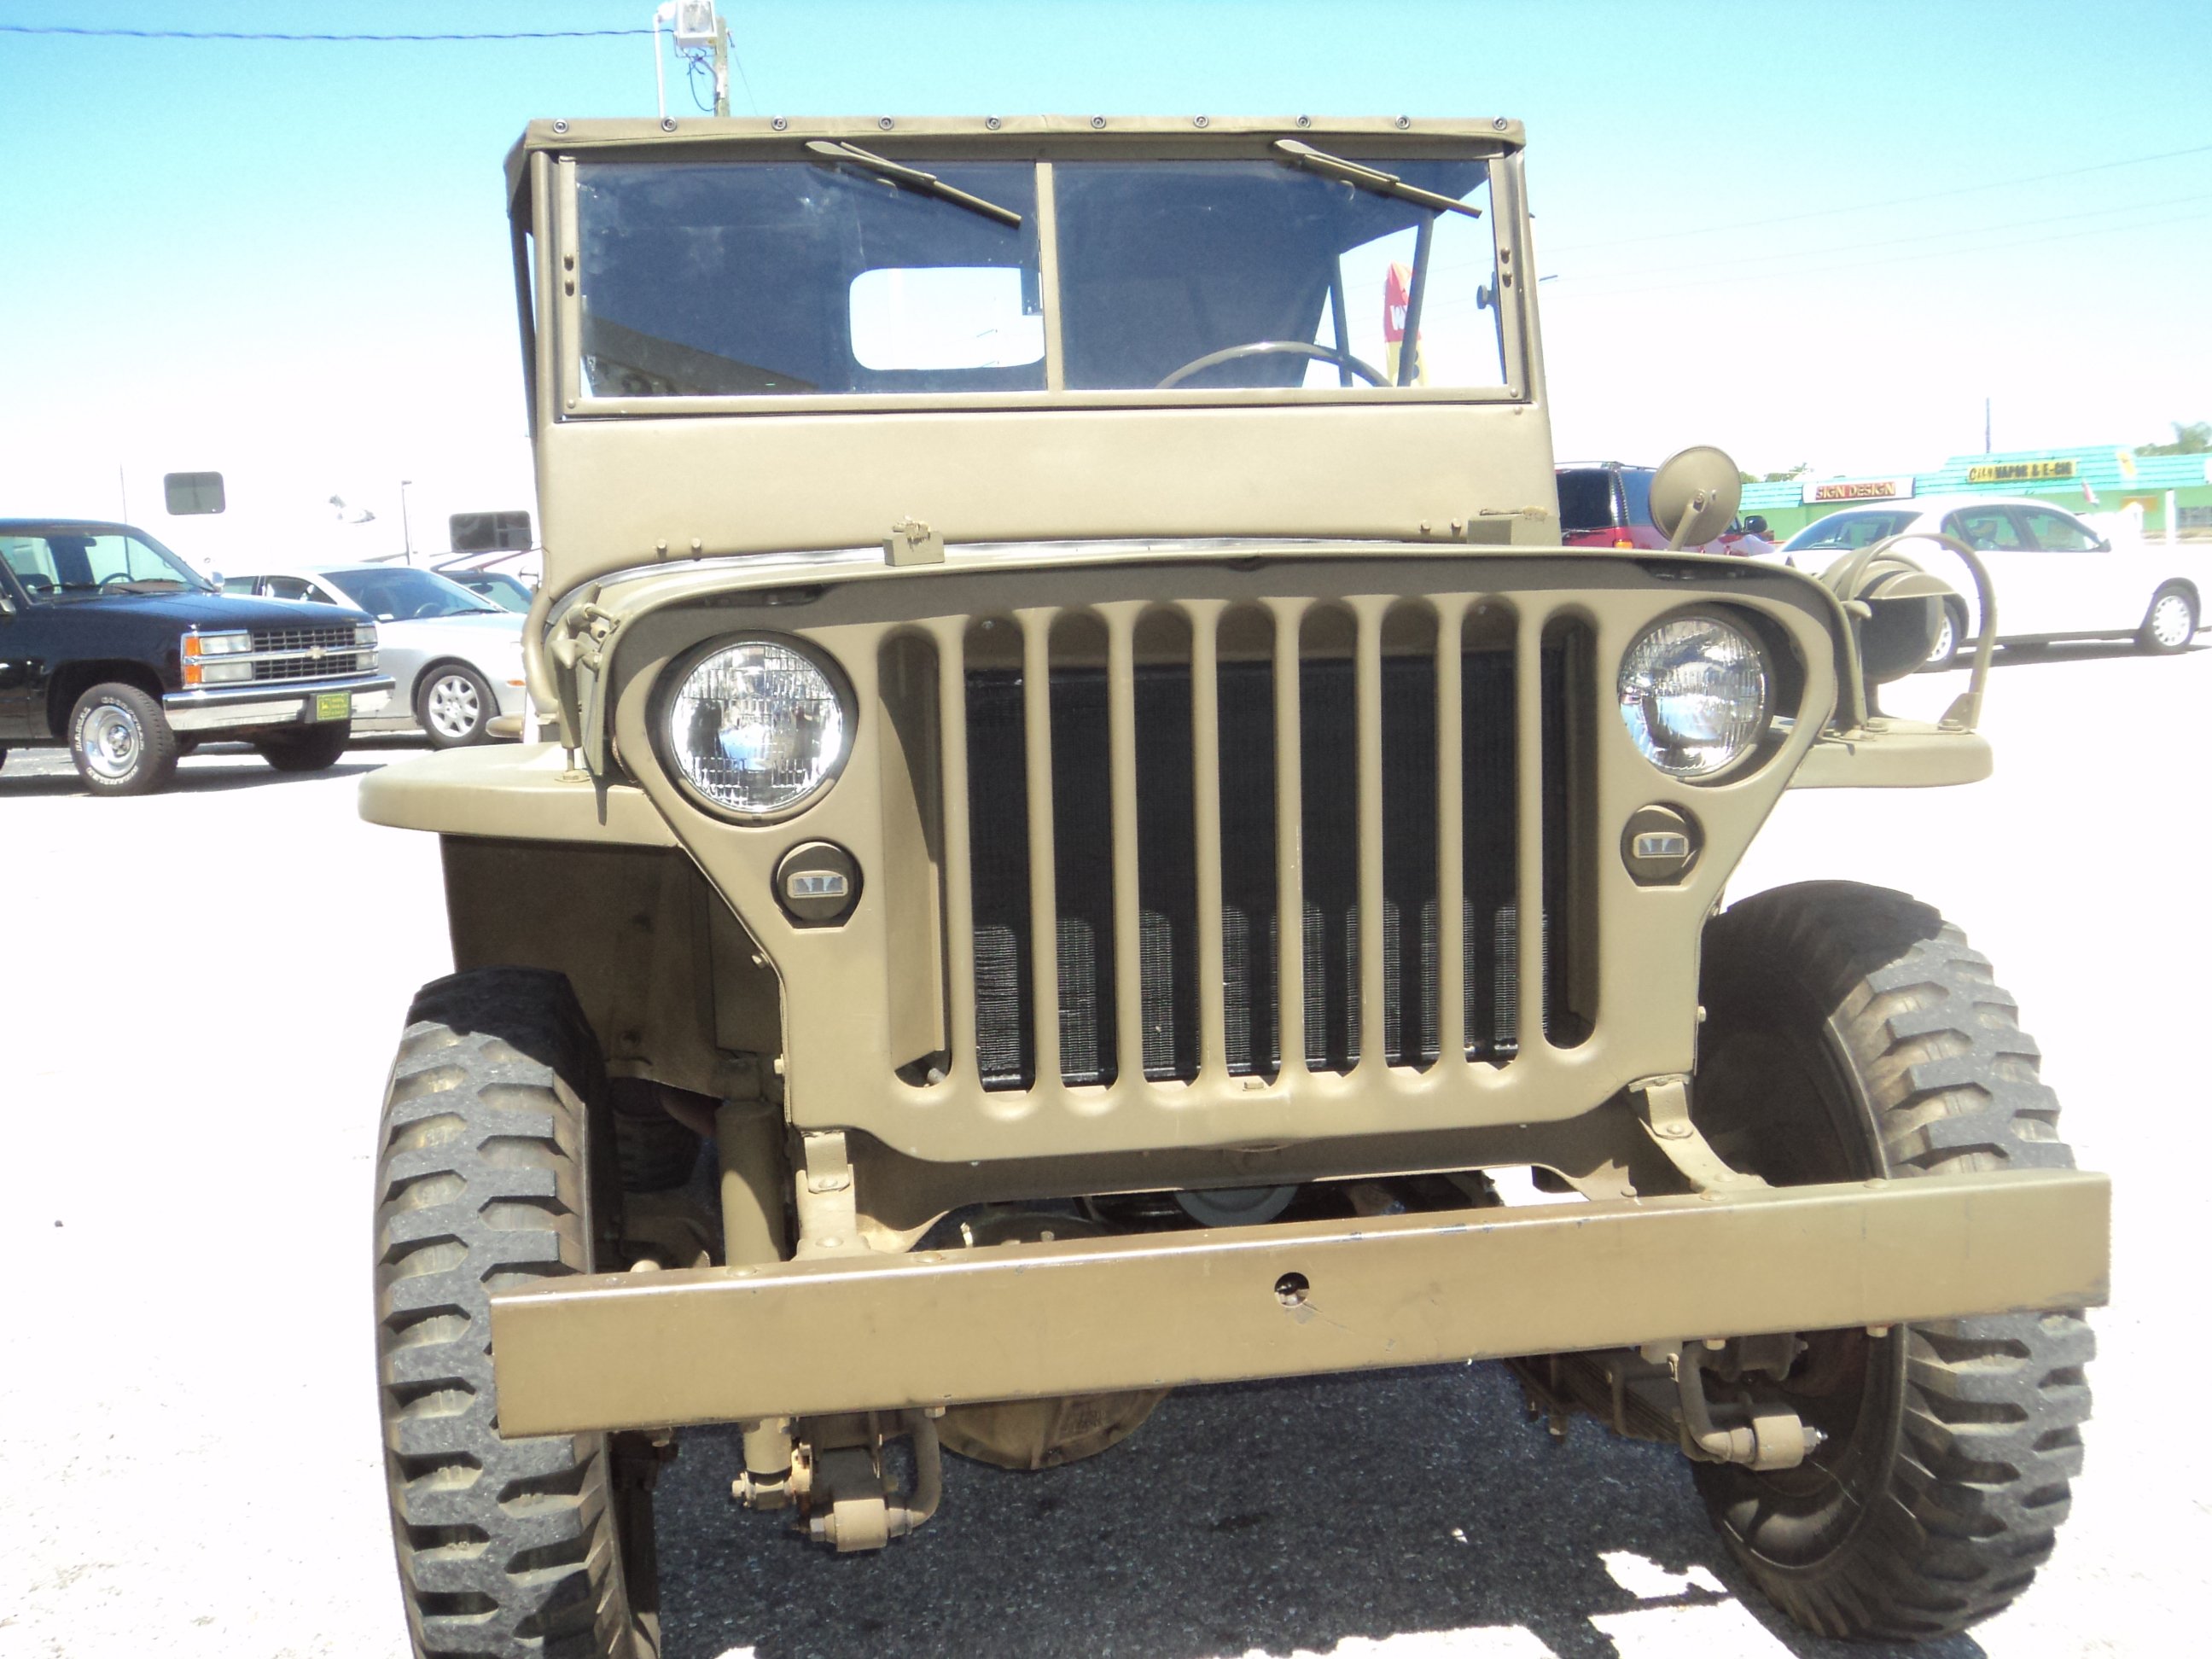 1942, Ford, Military, Jeep, Military, Classic, Old, Vintage, Original, Usa, 2592x1944 02 Wallpaper